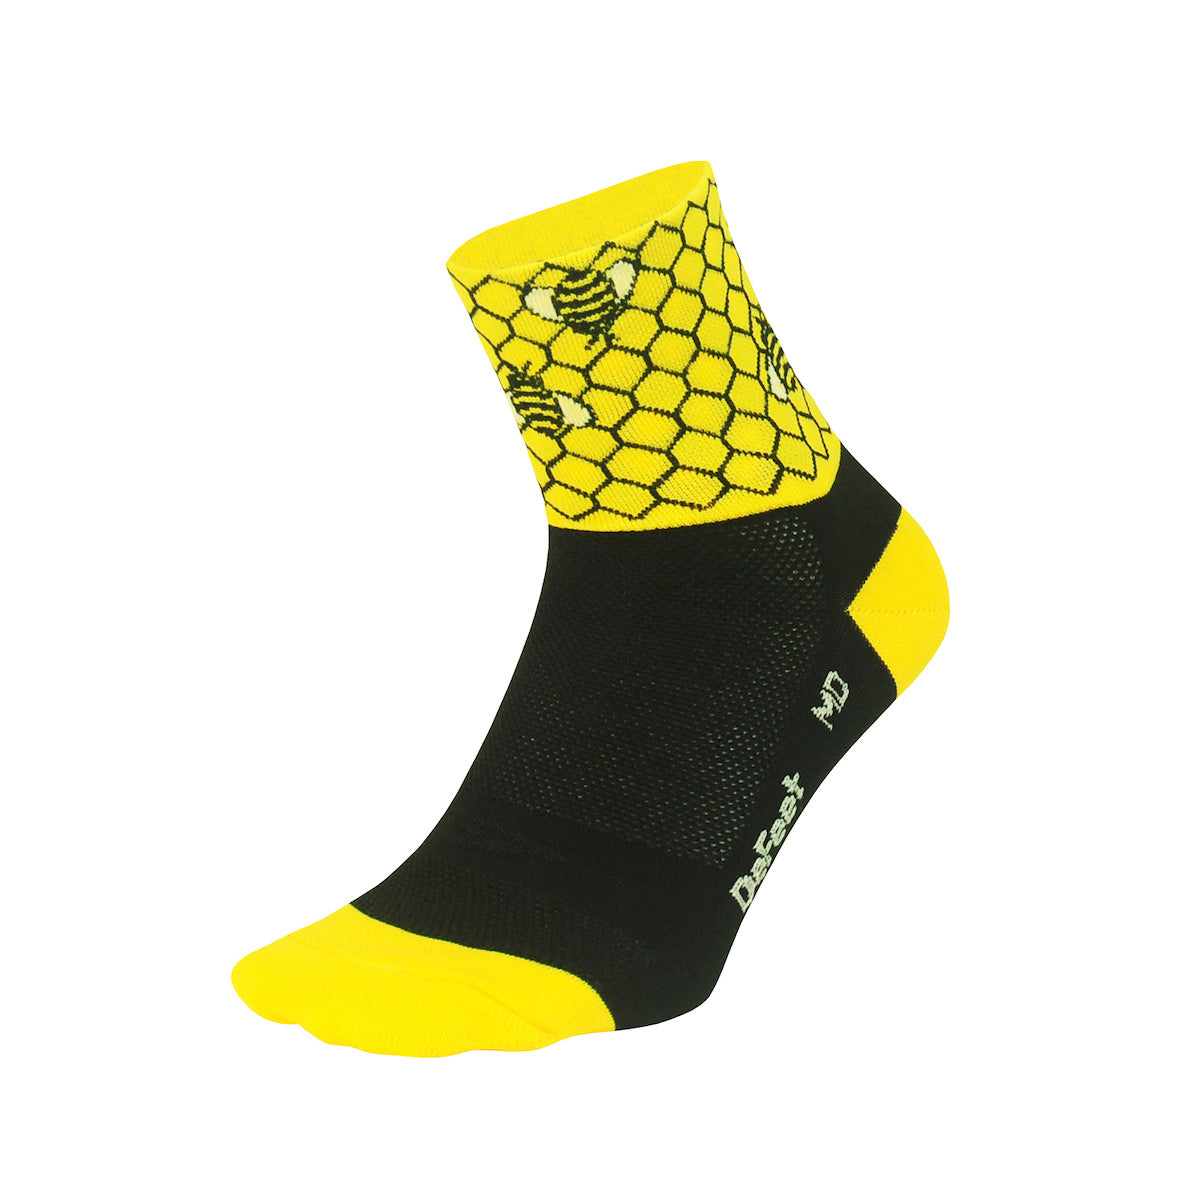 Aireator 3" cuff cycling sock in black with yellow heel, toe, and cuff. Honeycomb design on cuff with bees.